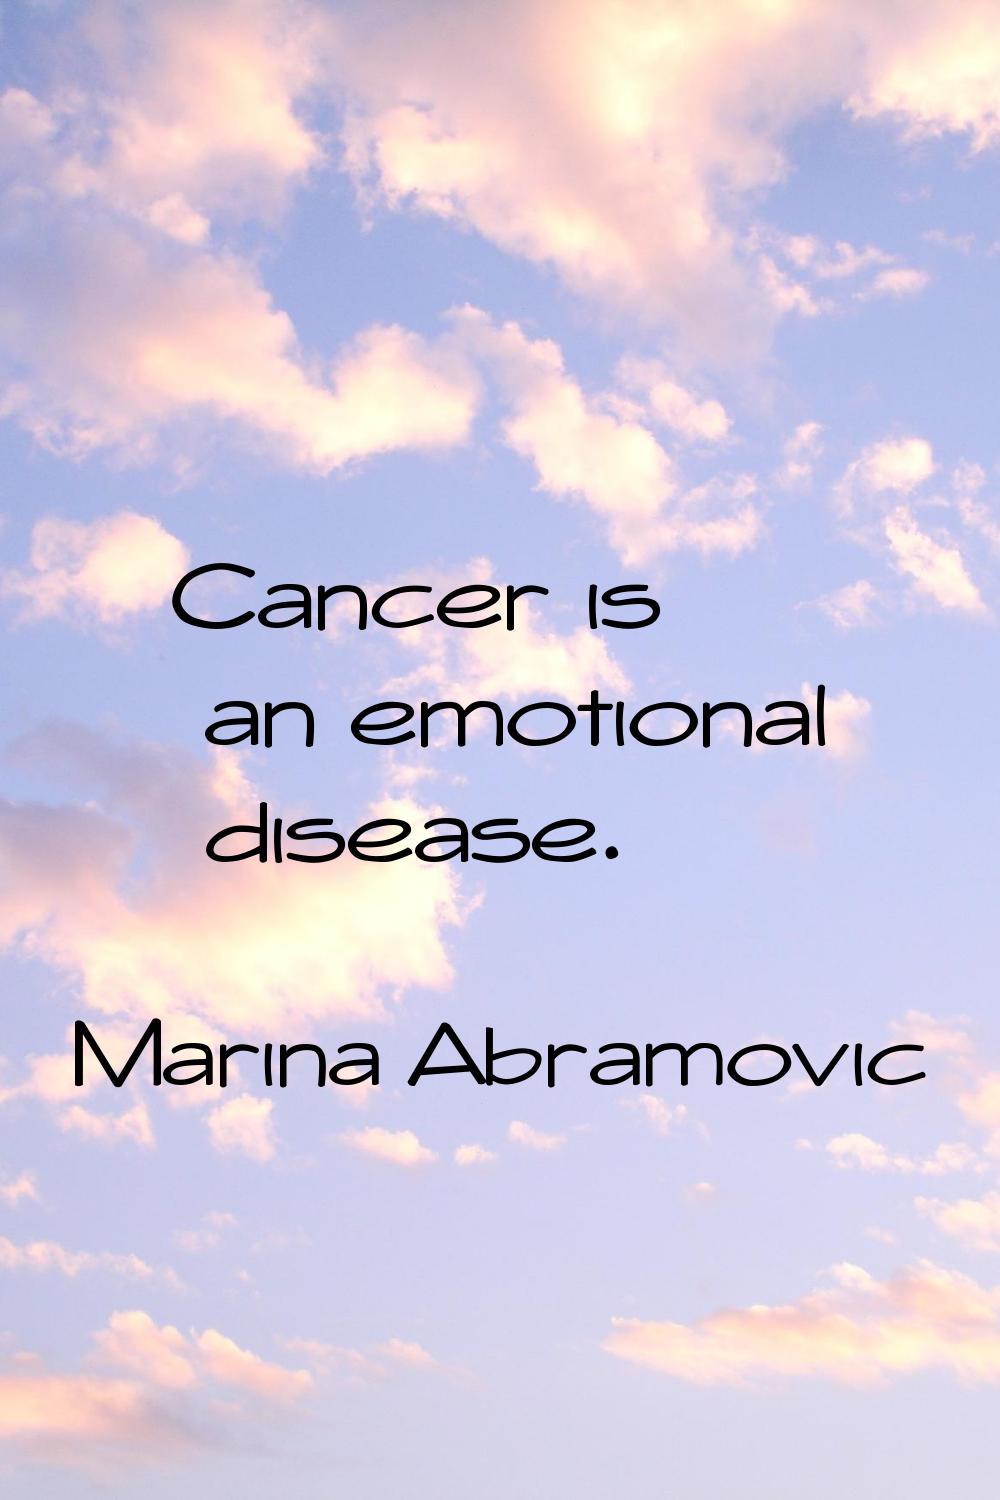 Cancer is an emotional disease.